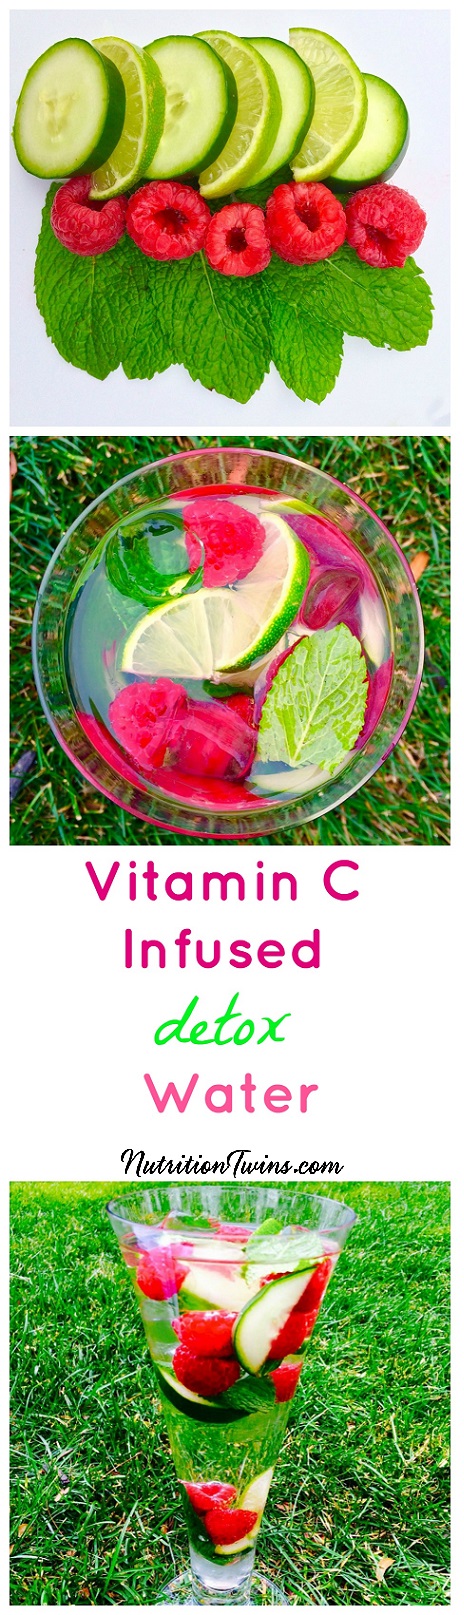 Vitamin_C_Infused_Detox_Water_collage_sm